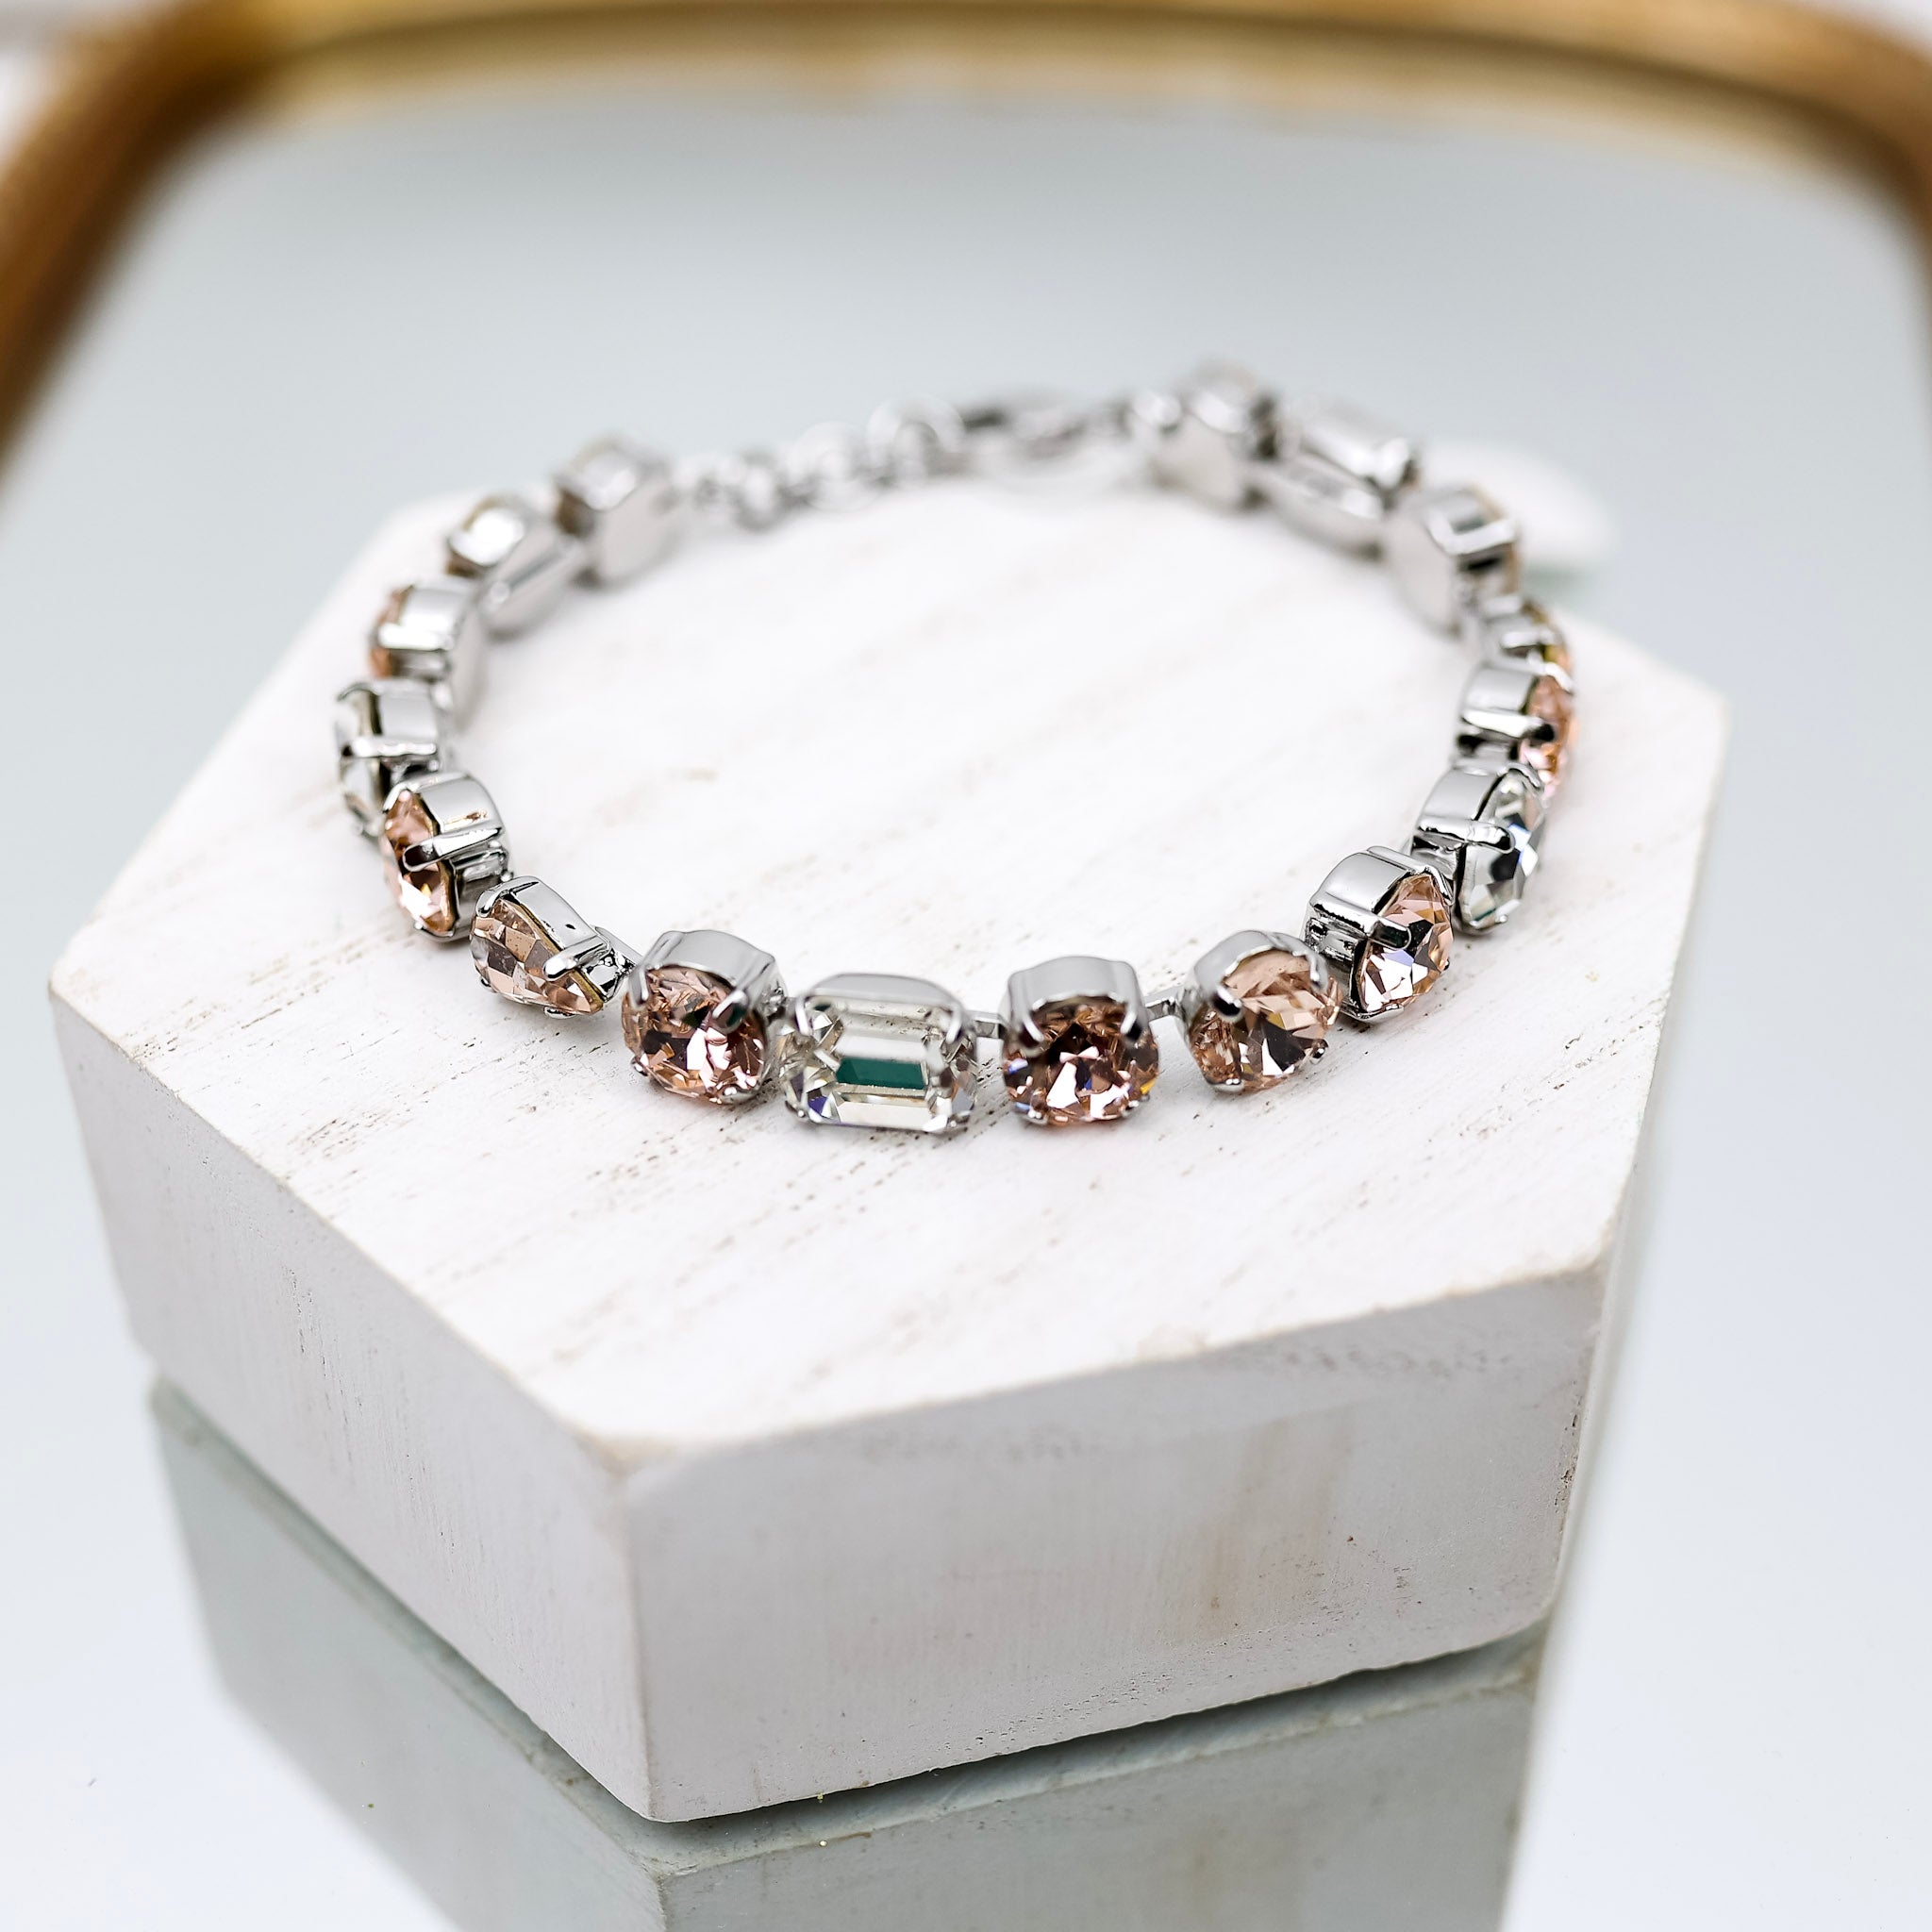 A silver tone tennis bracelet with cushion cut, emerald cut, and teardrop cut crystals that are topaz, blush, and clear.